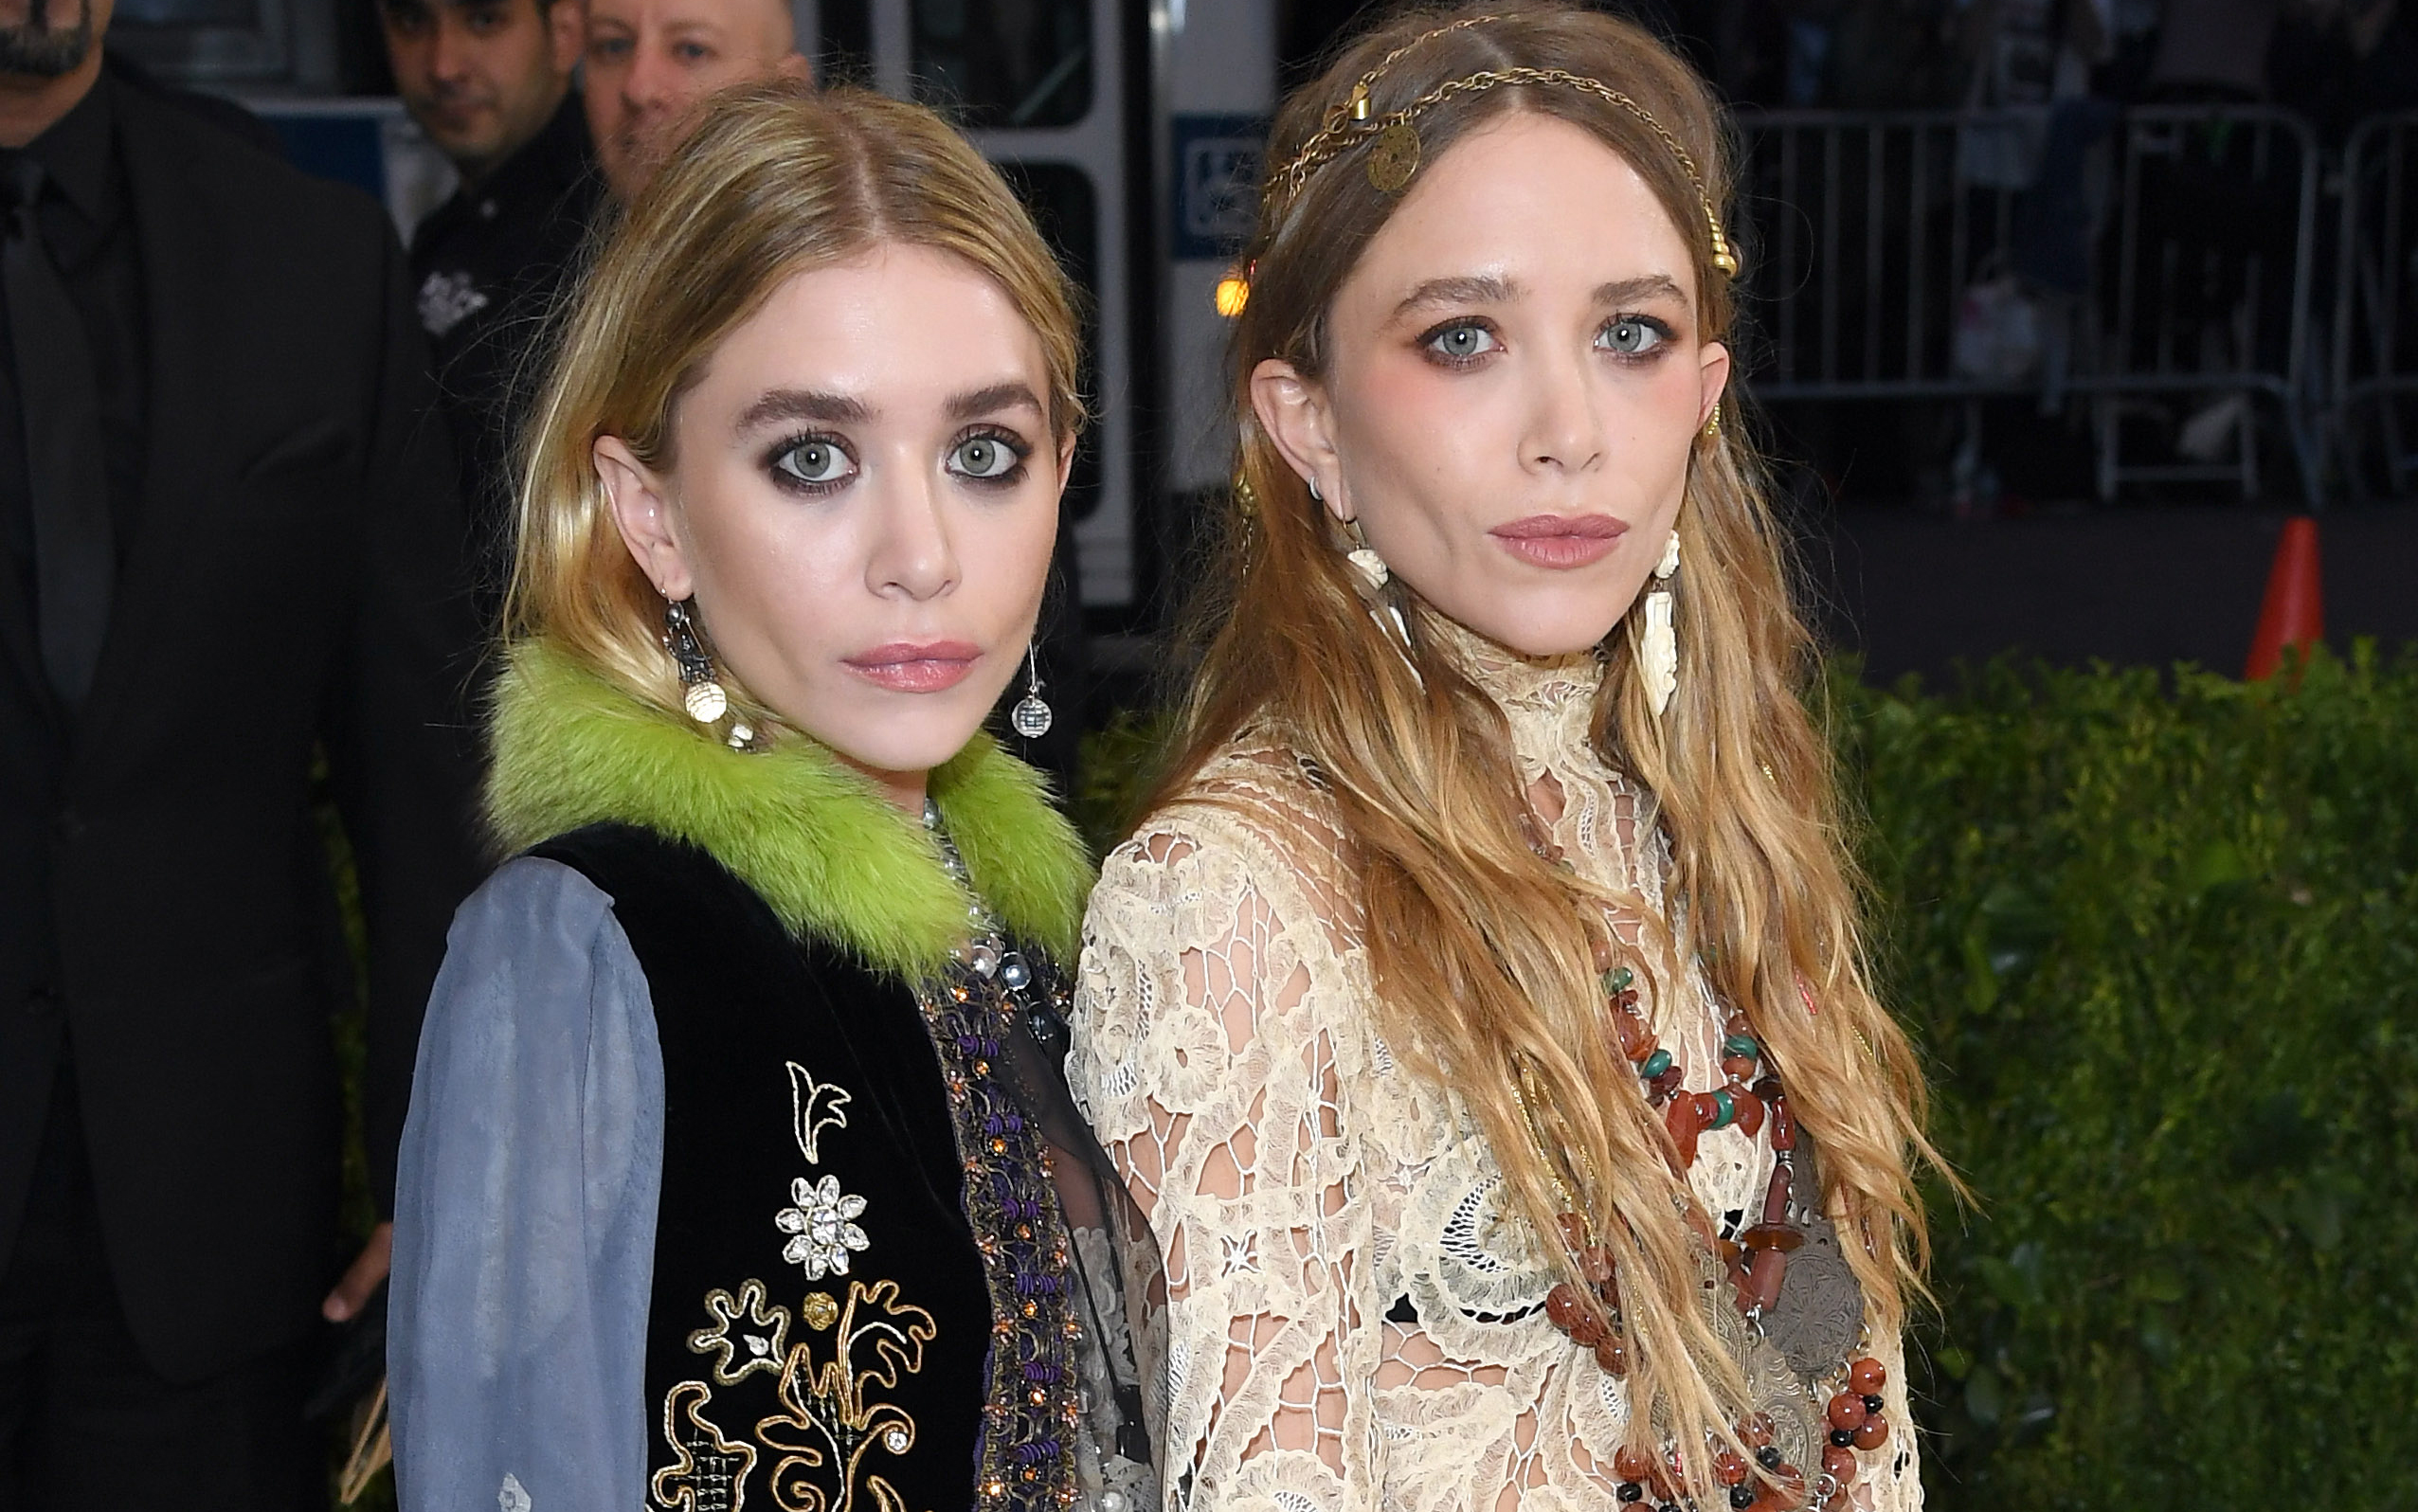 I don't think about Mary Kate Olsen a lot, but I think about her